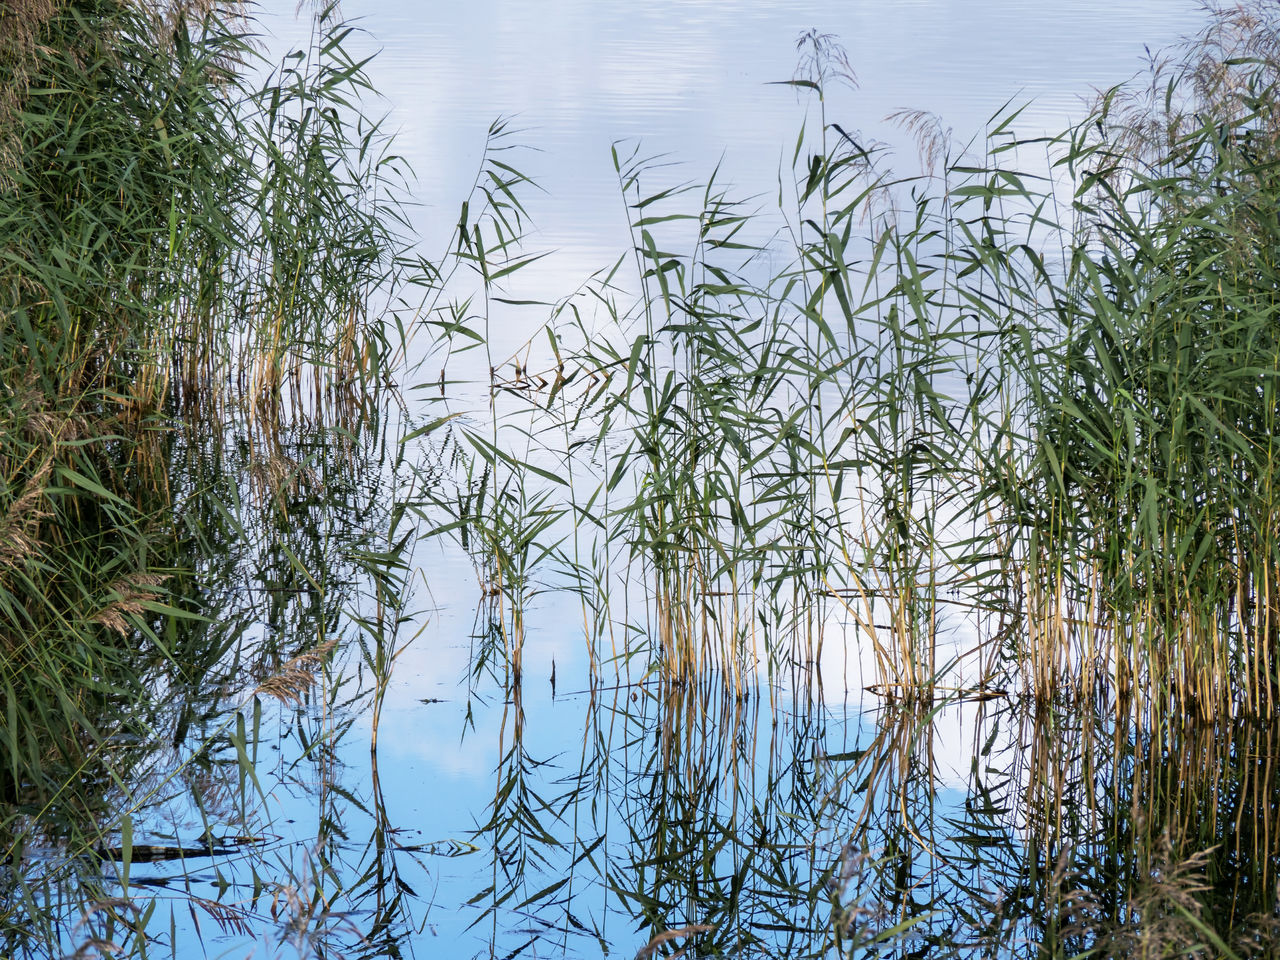 water, plant, grass, wetland, nature, lake, reflection, branch, tree, beauty in nature, natural environment, no people, swamp, tranquility, sky, marsh, day, growth, outdoors, animal wildlife, leaf, animal, environment, animal themes, scenics - nature, landscape, reed, non-urban scene, tranquil scene, wildlife